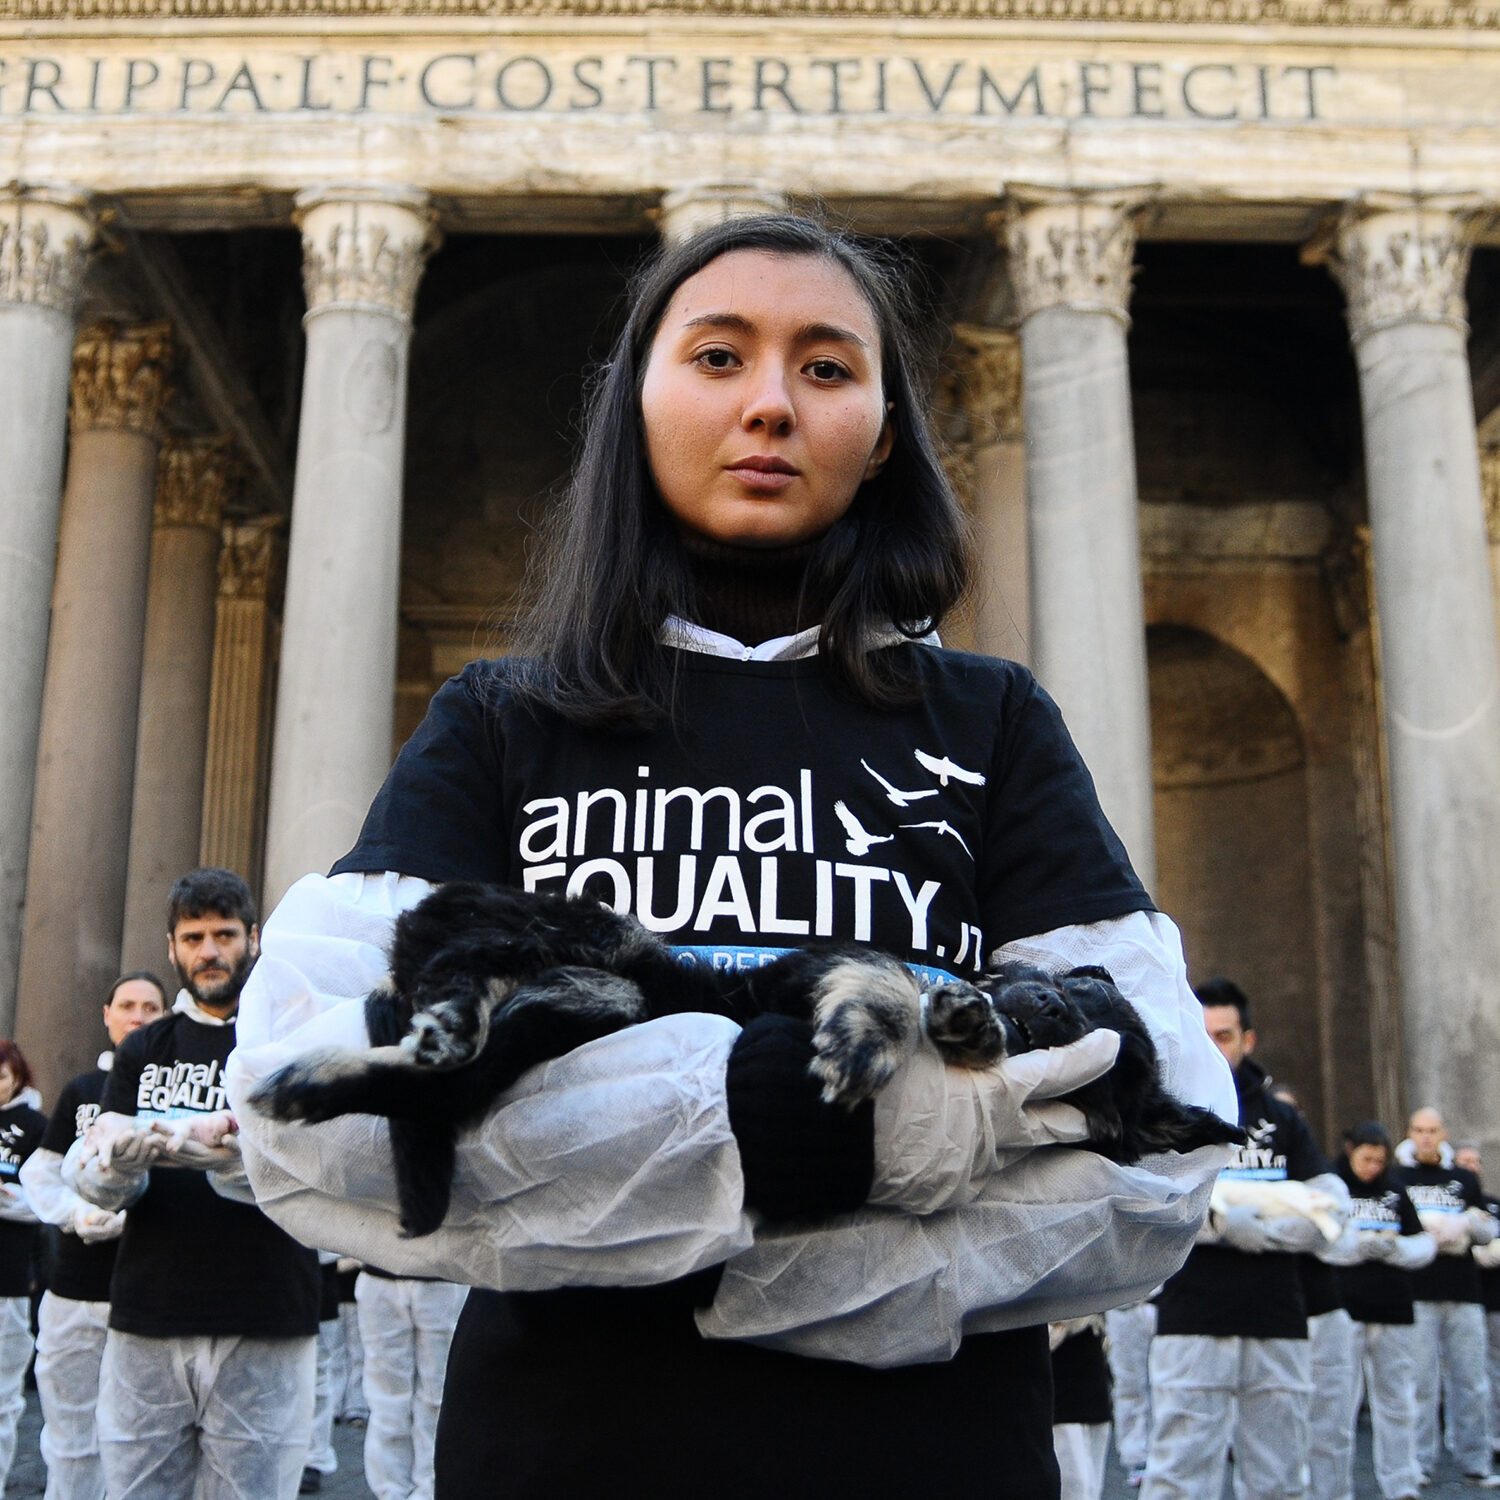 Animal Equality volunteer at protest in Rome